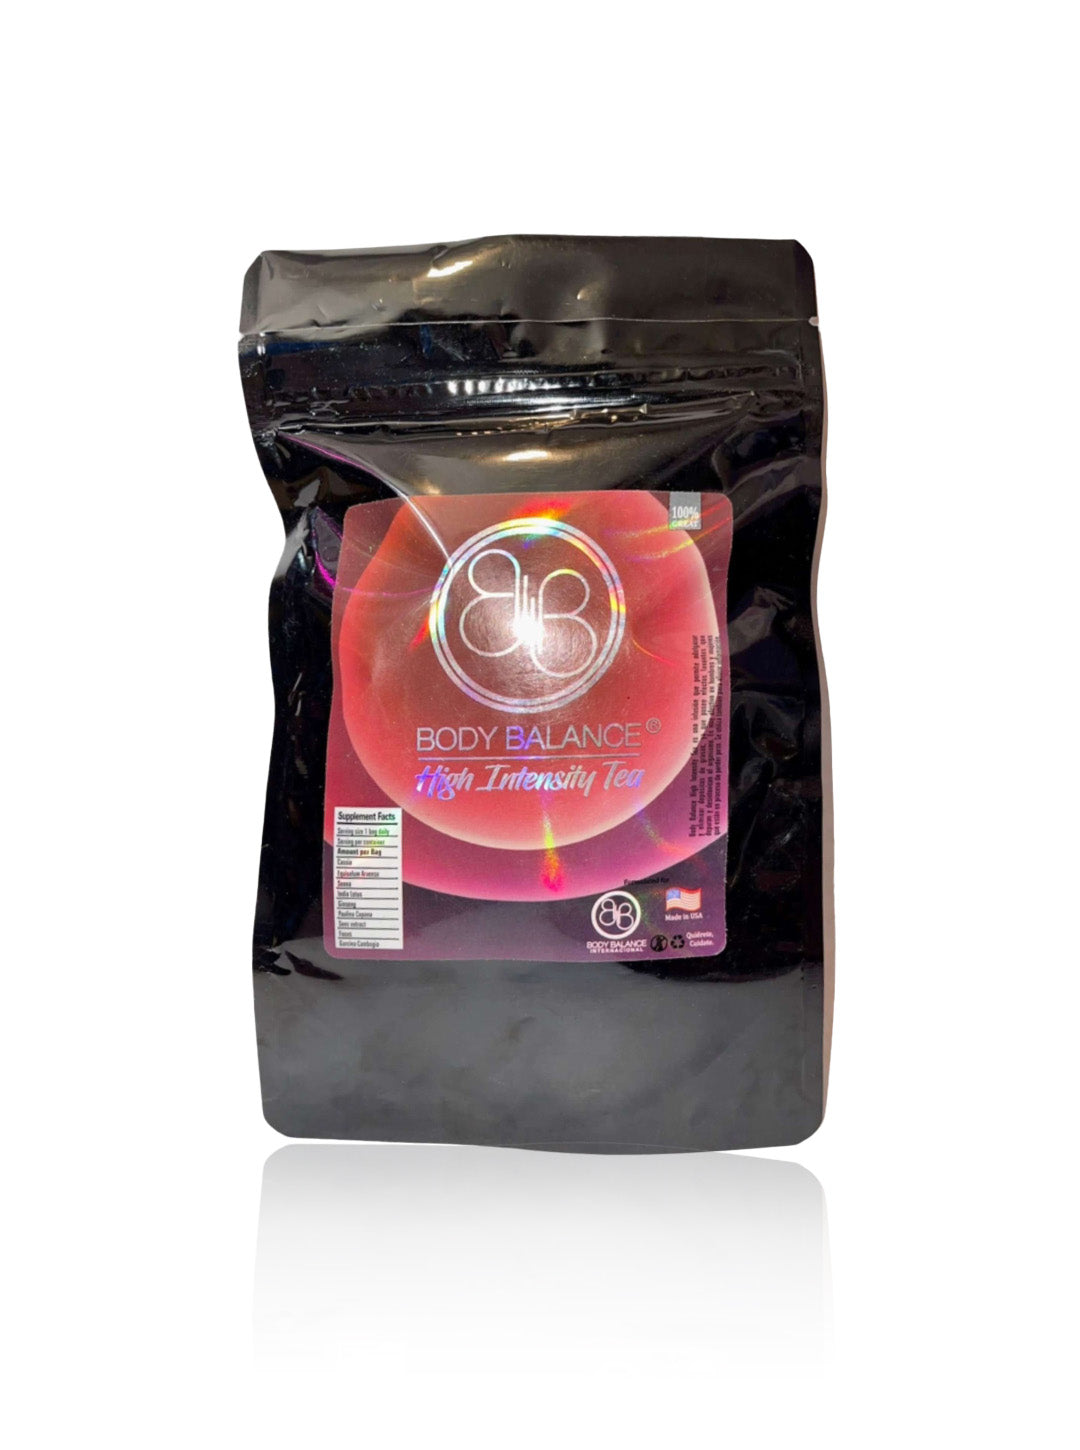 Tea Body Balance 365 Skinny High Intensity,Purifies the body increasing the lose weight